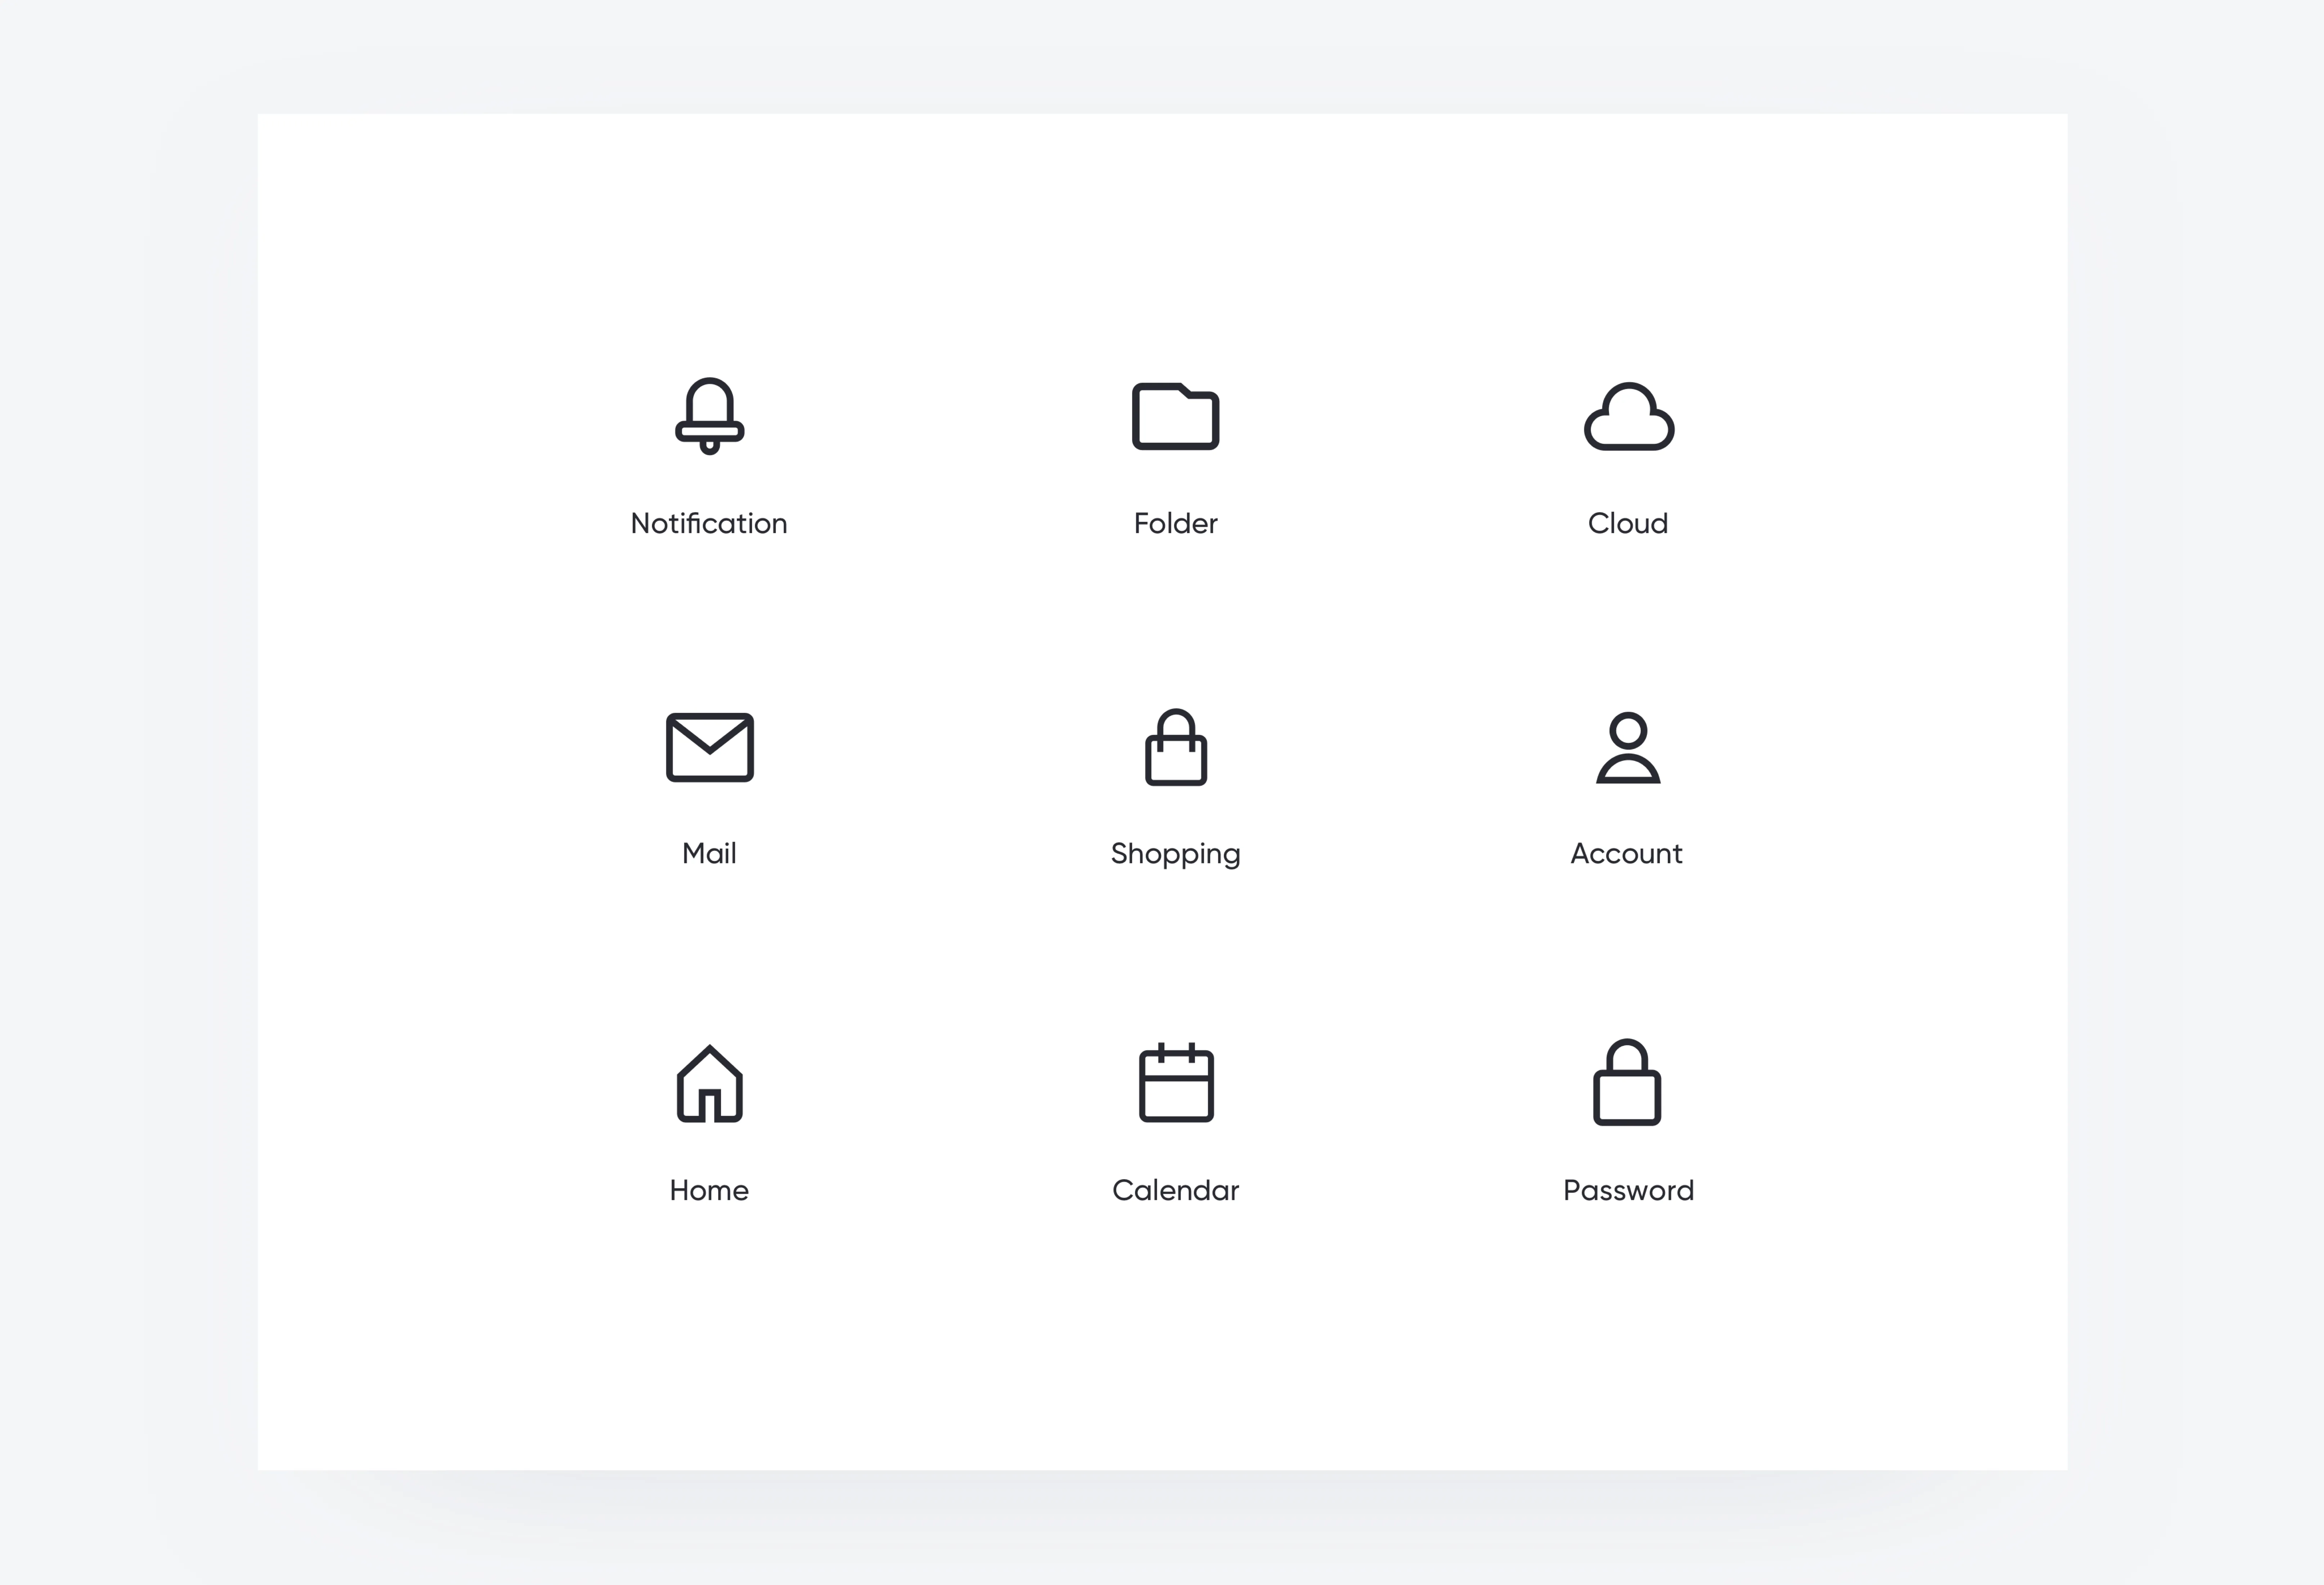 Visually recognizable icons